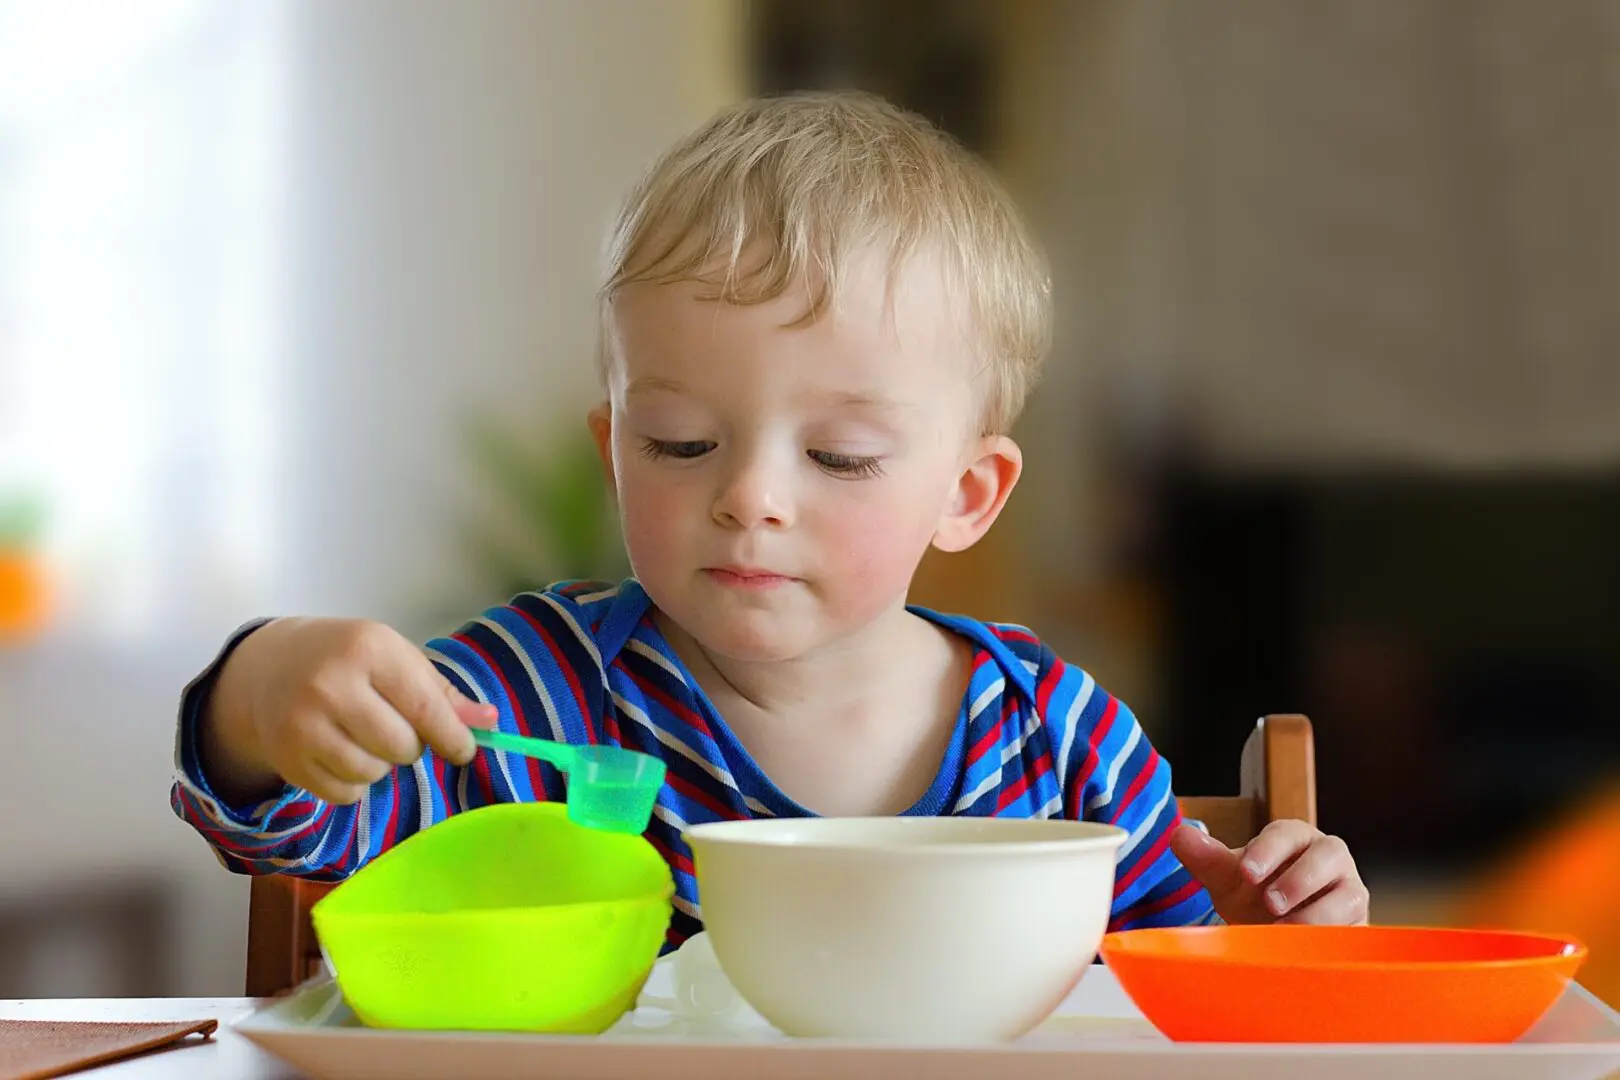 A young boy is eating from two bowls.